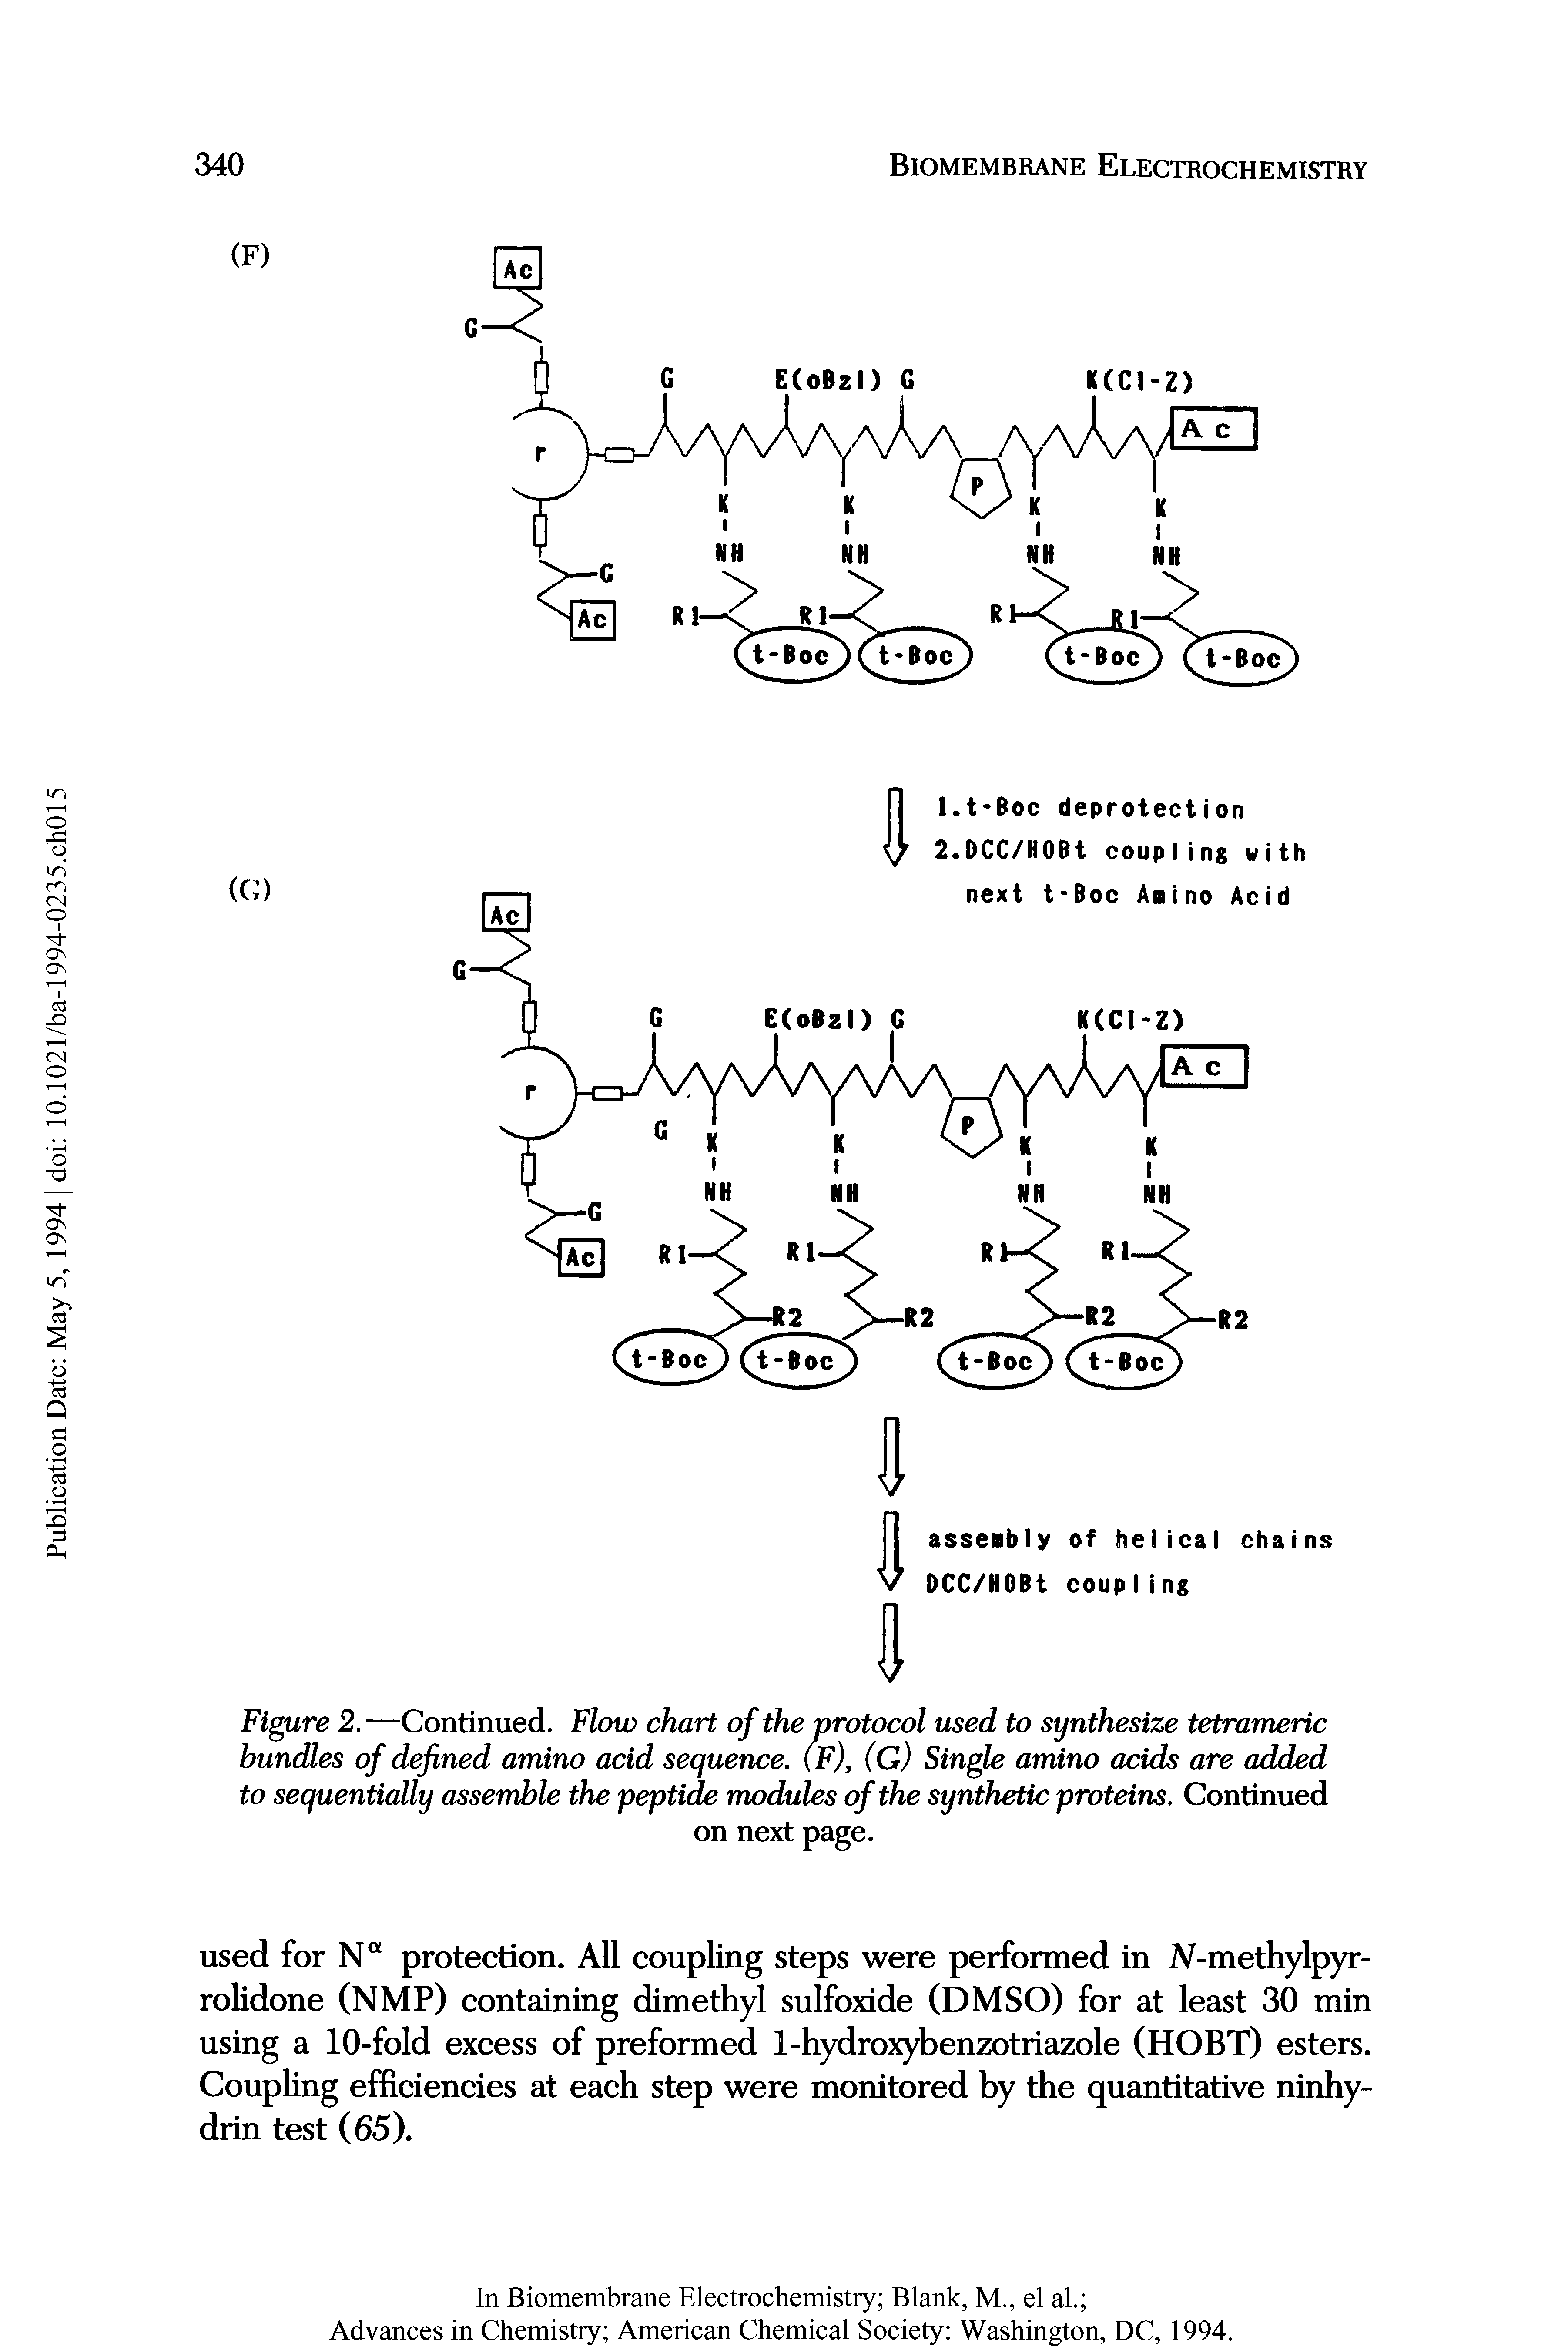 Figure 2.—Continued. Flow chart of the protocol used to synthesize tetrameric bundles of defined amino acid sequence. (F), (G) Single amino acids are added to sequentially assemble the peptide modules of the synthetic proteins. Continued...